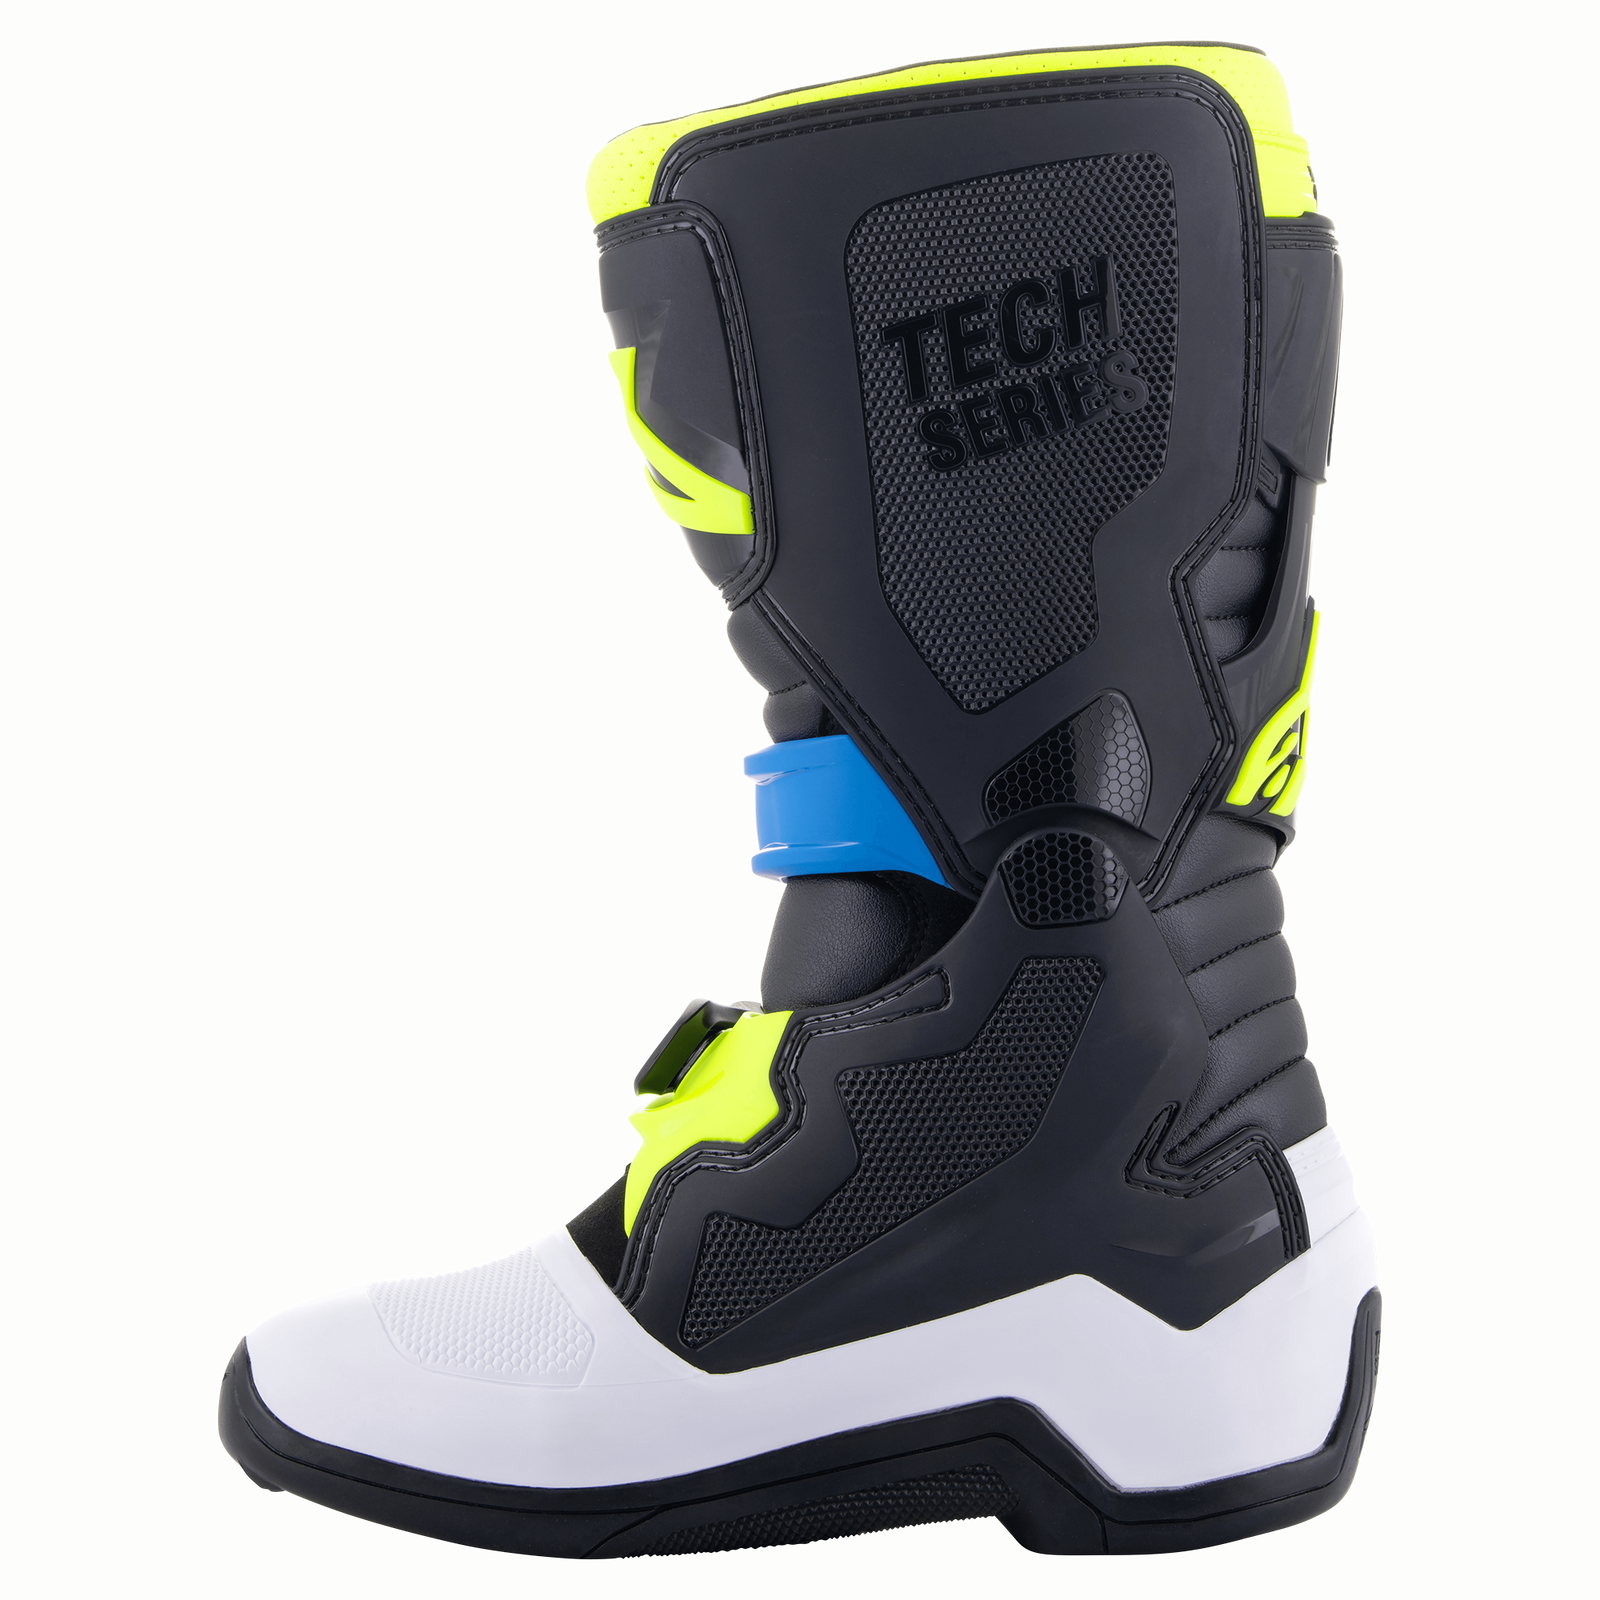 Youth Tech 7S Boots